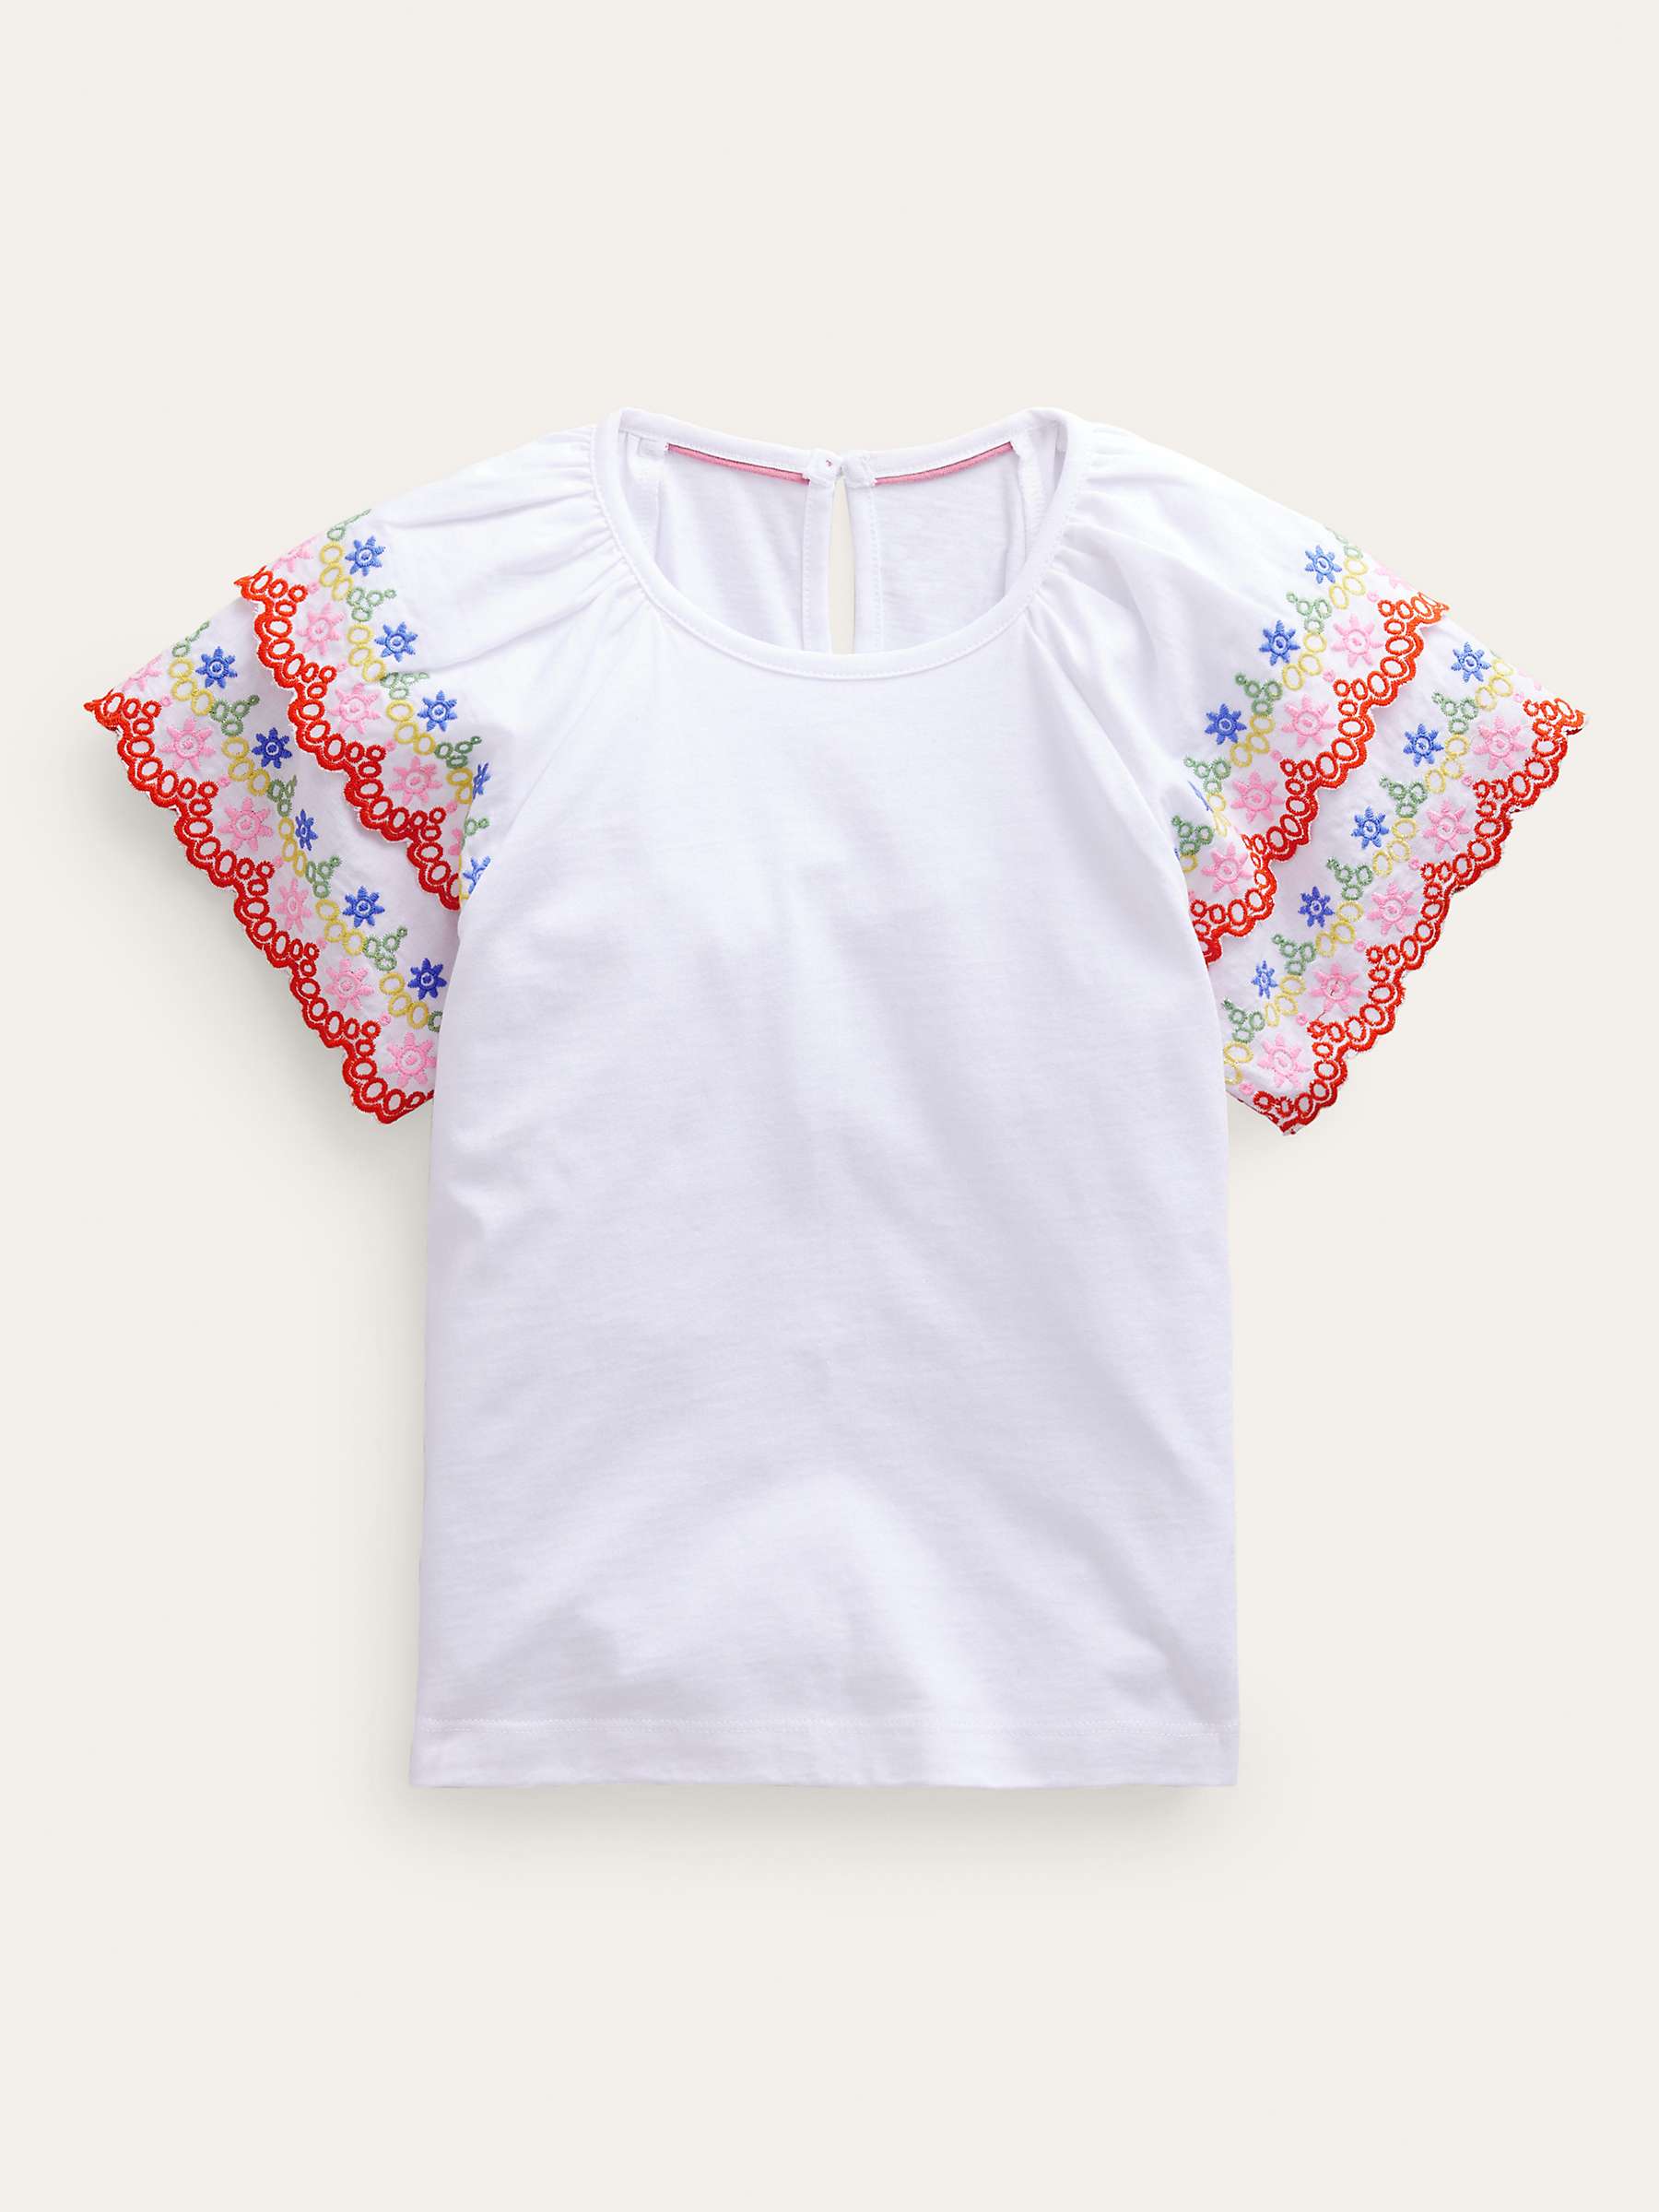 Buy Mini Boden Kids' Broderie Sleeve Mix T-Shirt, Ivory/Multi Online at johnlewis.com